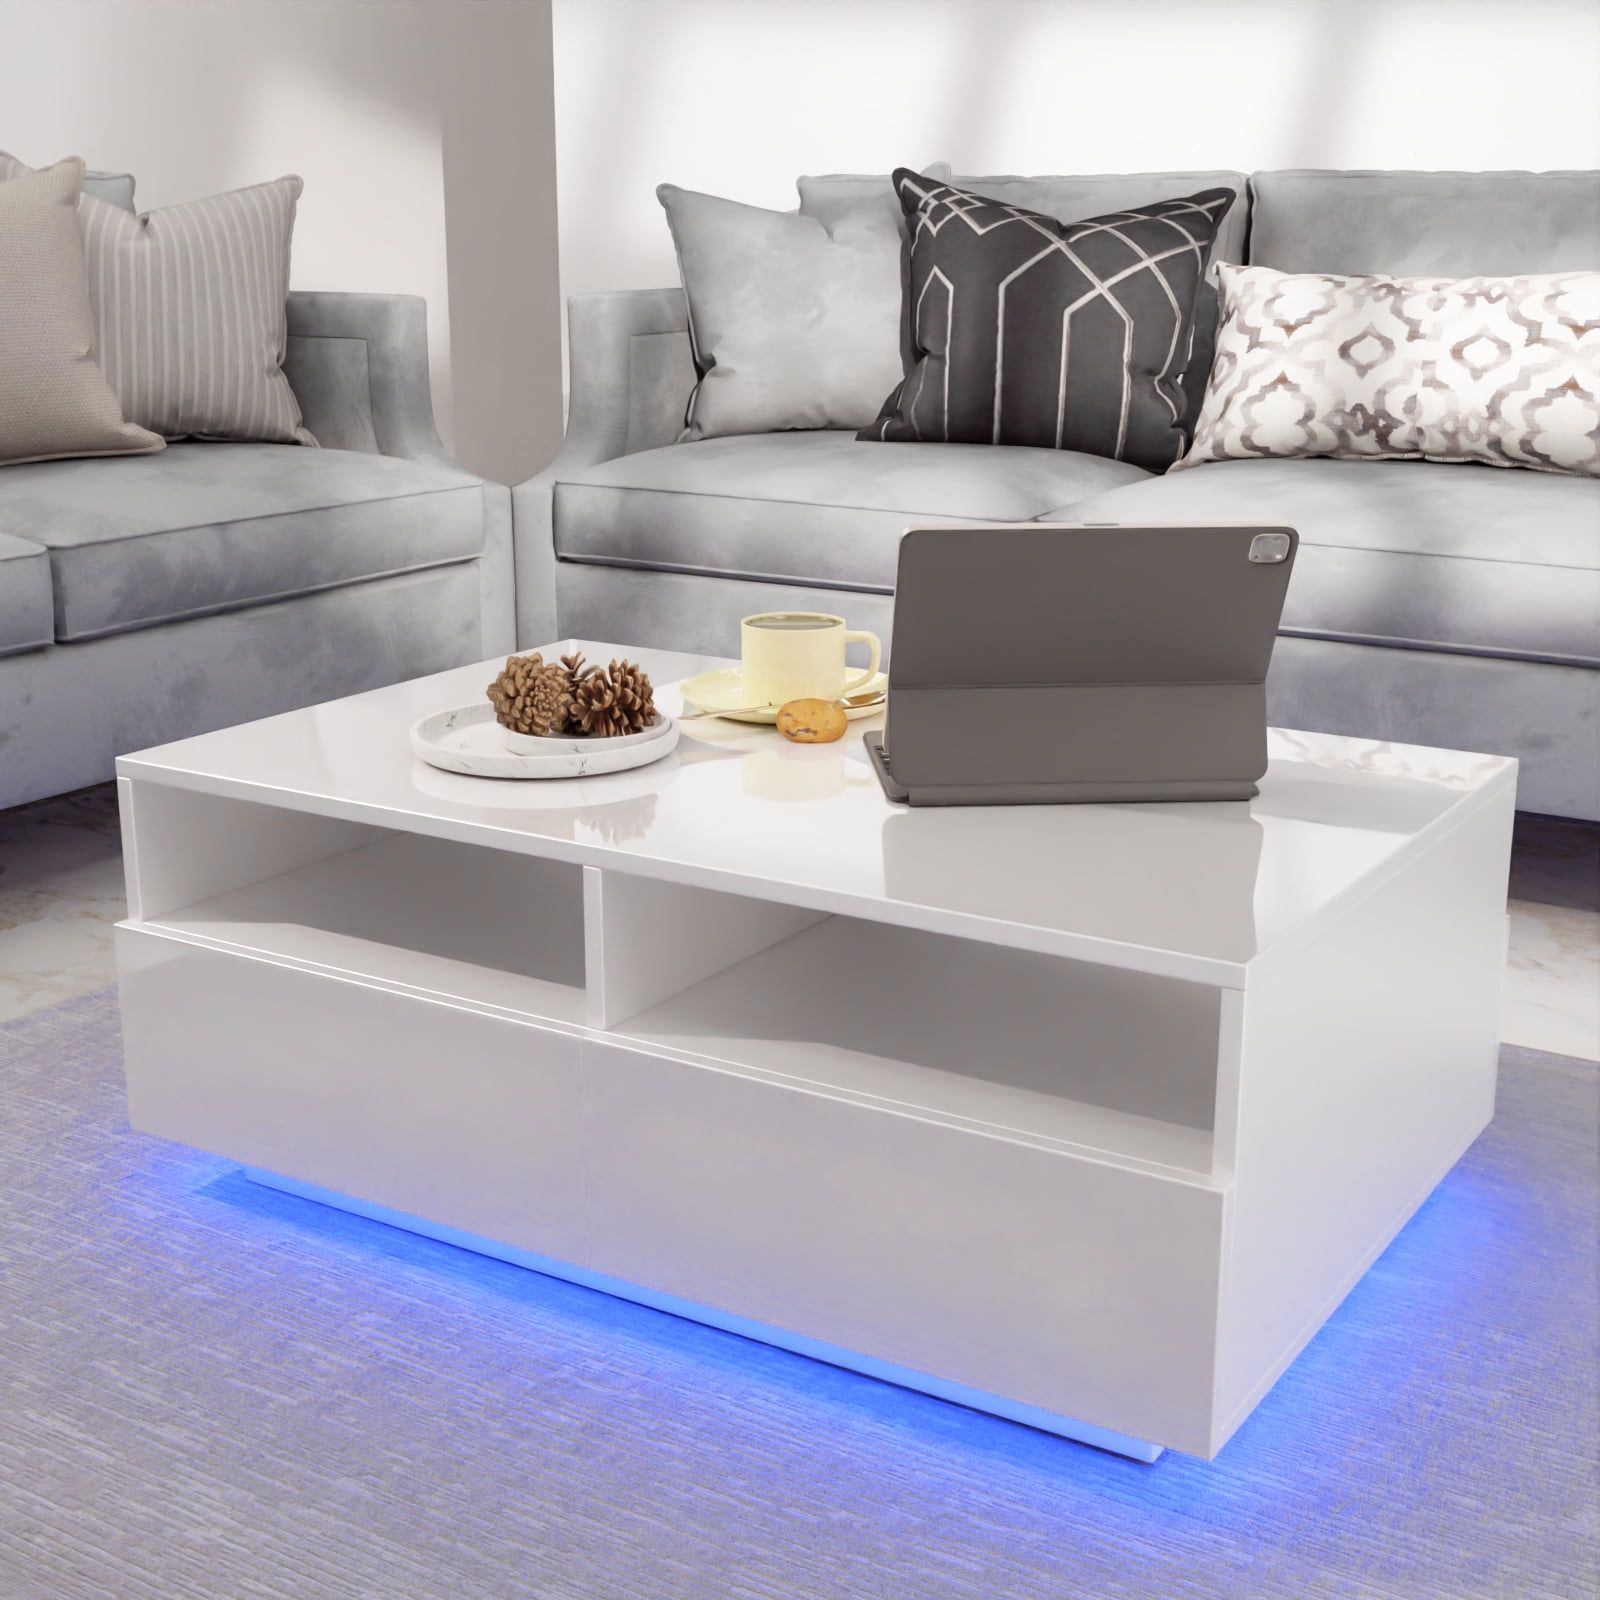 High Gloss Led Coffee Table Modern Center Tea Table With Adjustable Led  Light And Storage 35.4 X 21.7 X  (View 11 of 15)